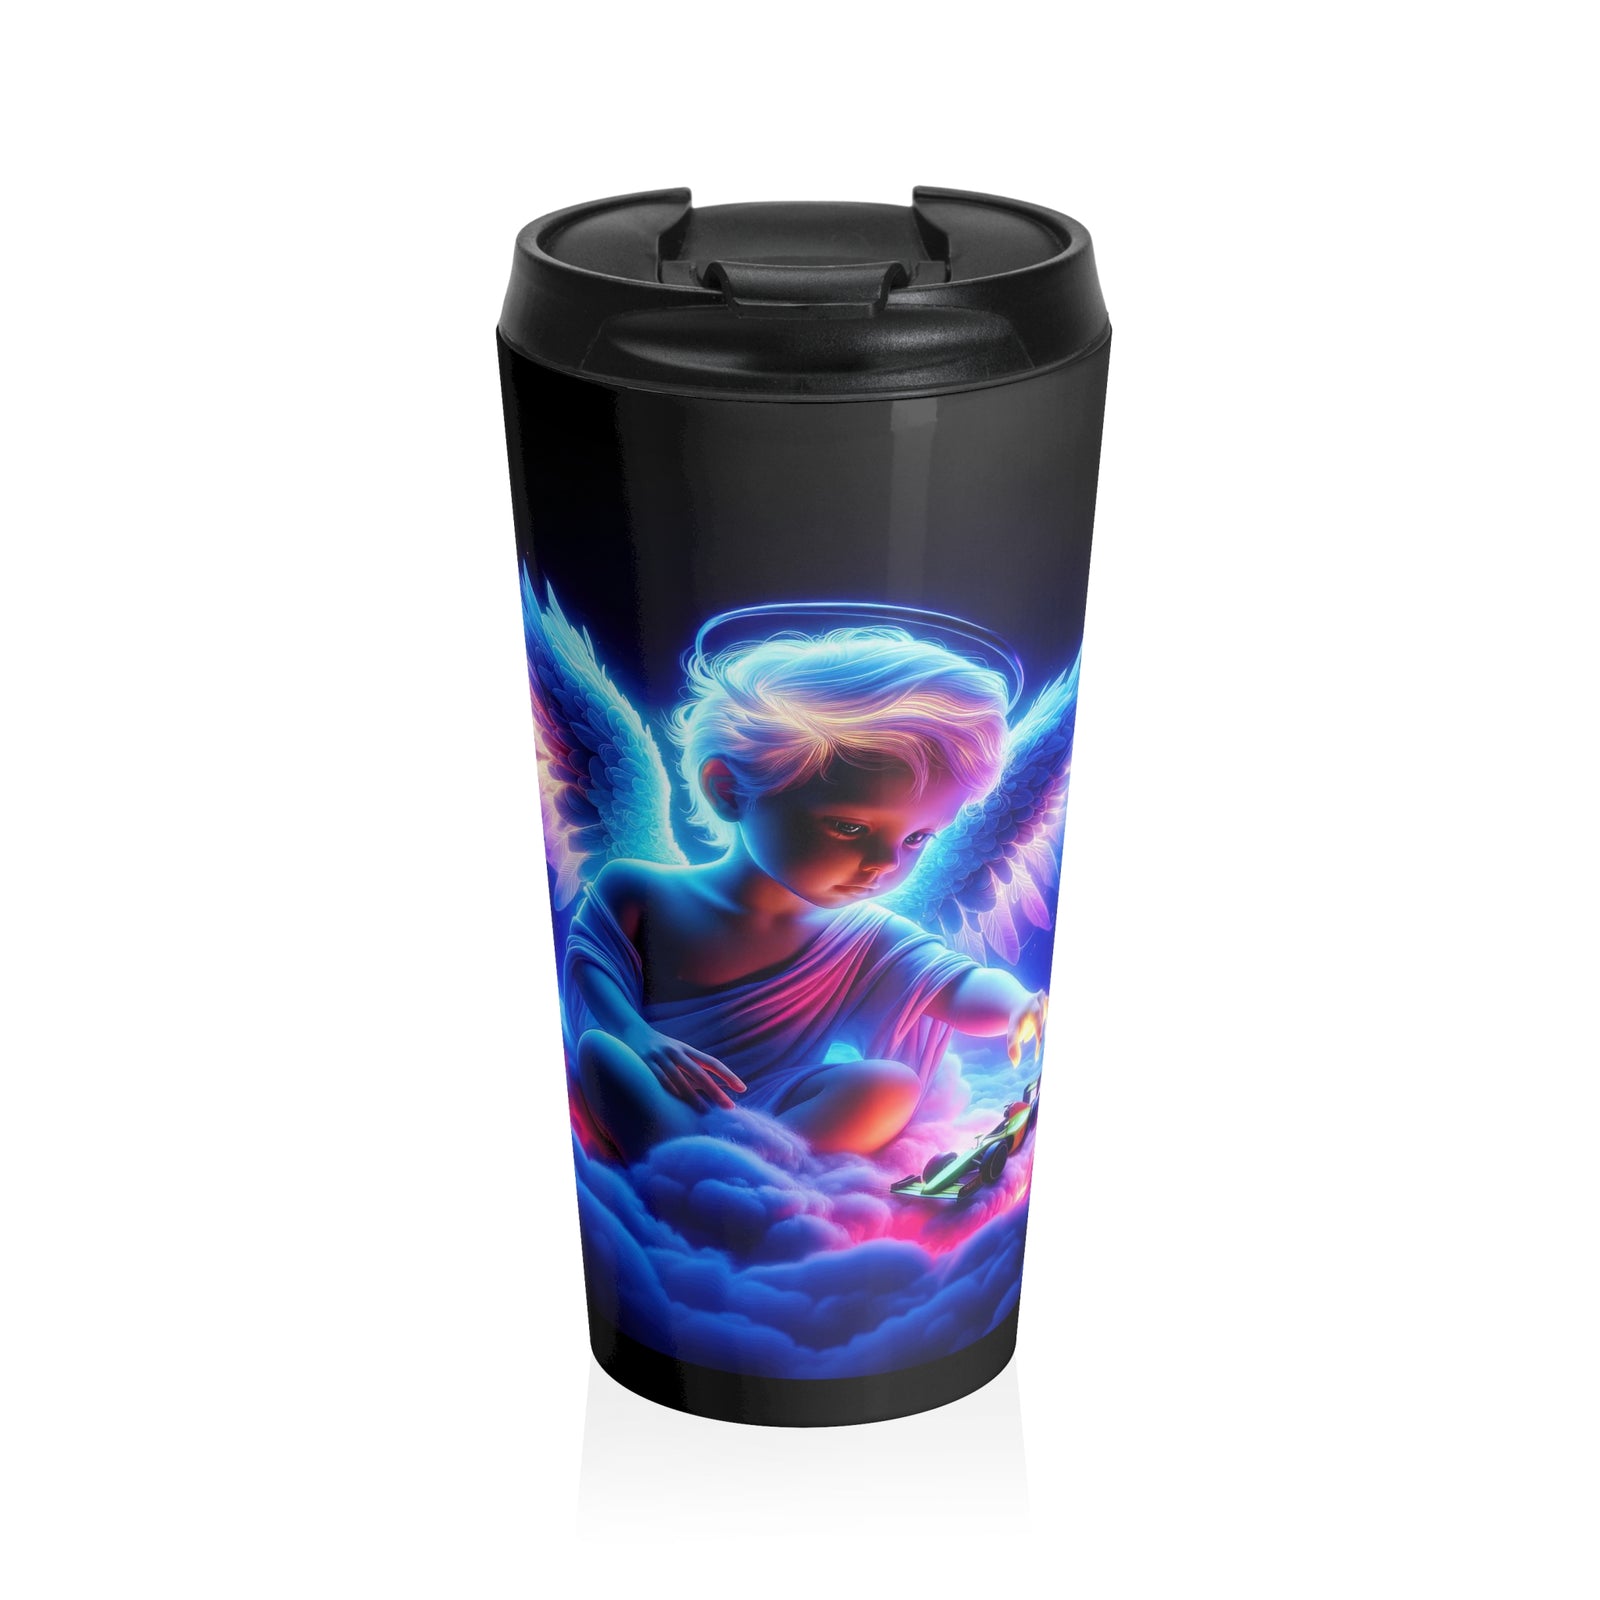 Playtime in the Cosmic Clouds Travel Mug